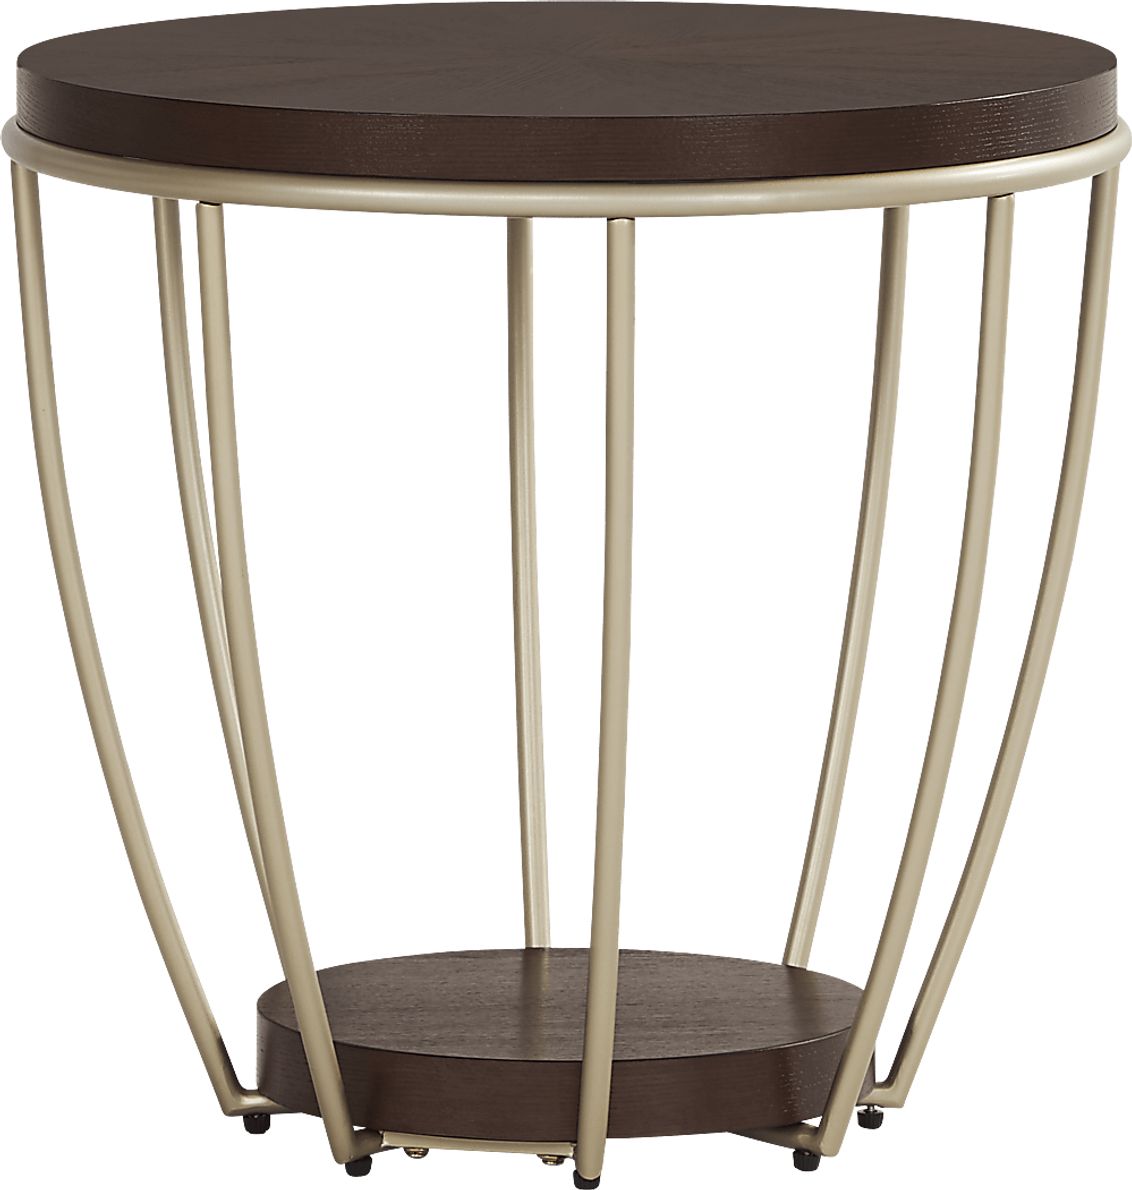 Prospect Heights Brown Cherry End Table